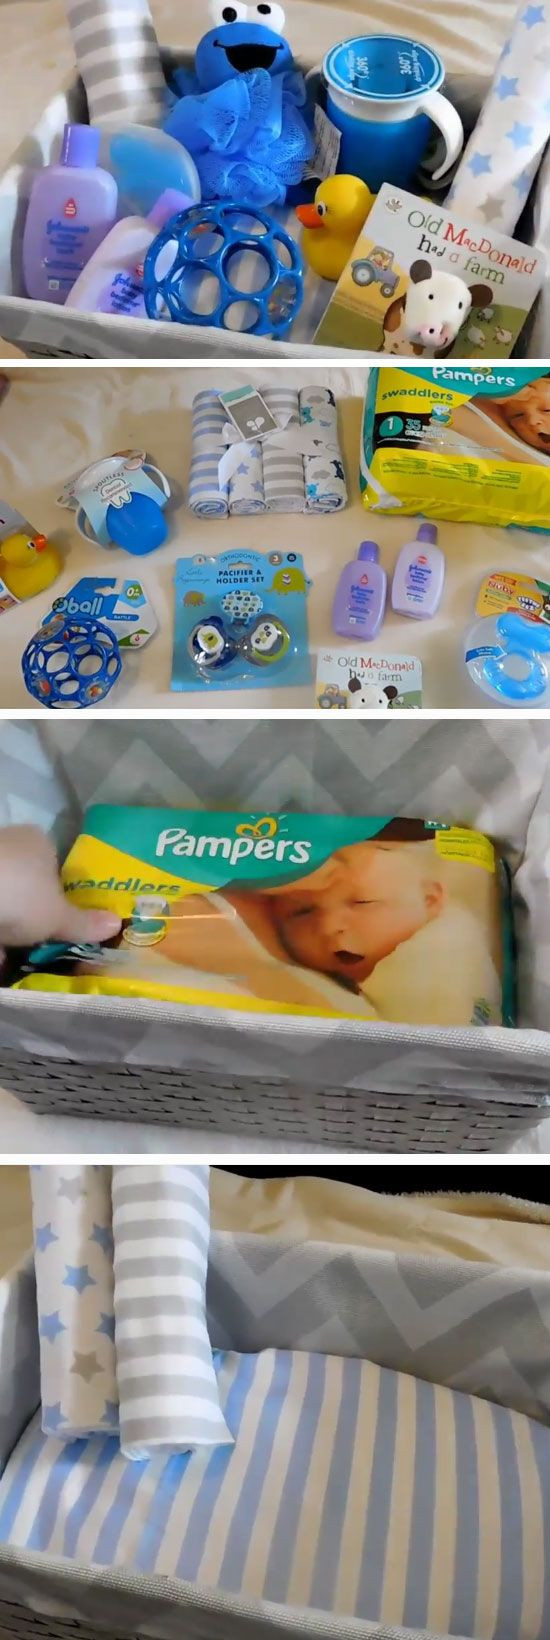 DIY Baby Shower Gifts For Boy
 Best 25 Baby t baskets ideas on Pinterest